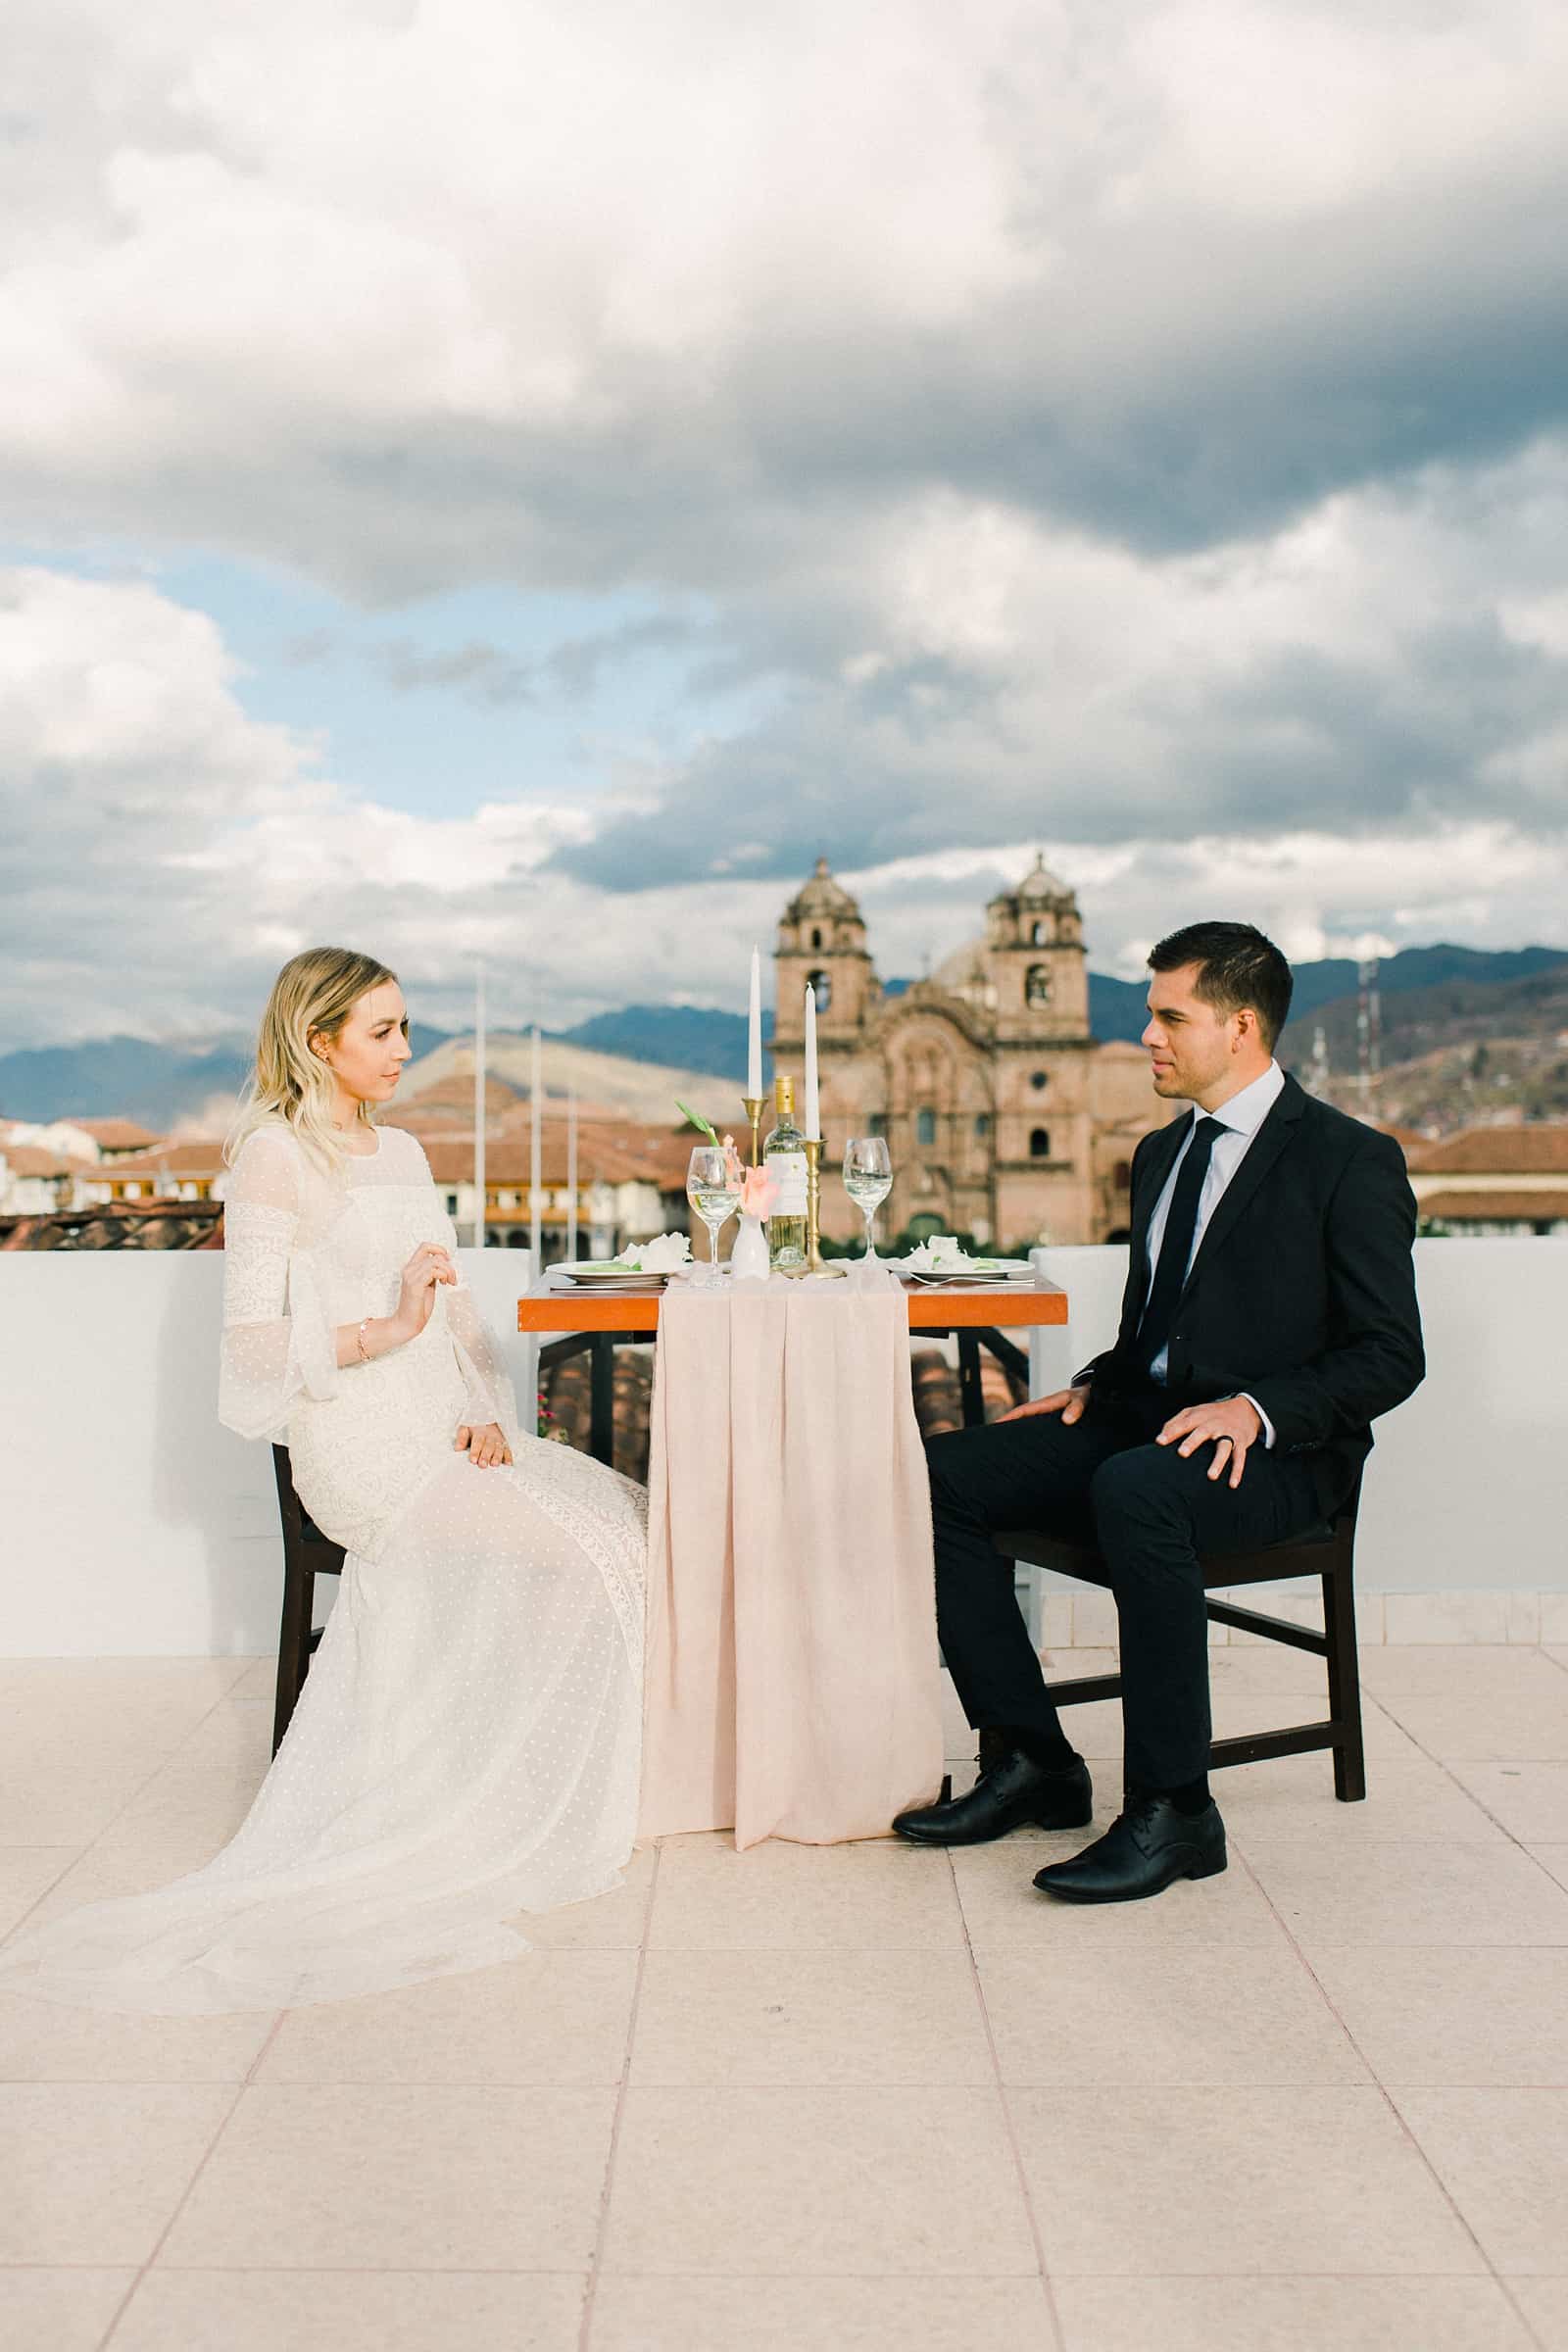 Cusco Peru Destination Wedding Inspiration, travel photography, bride and groom wedding dinner overlooking Cusco Cathedral